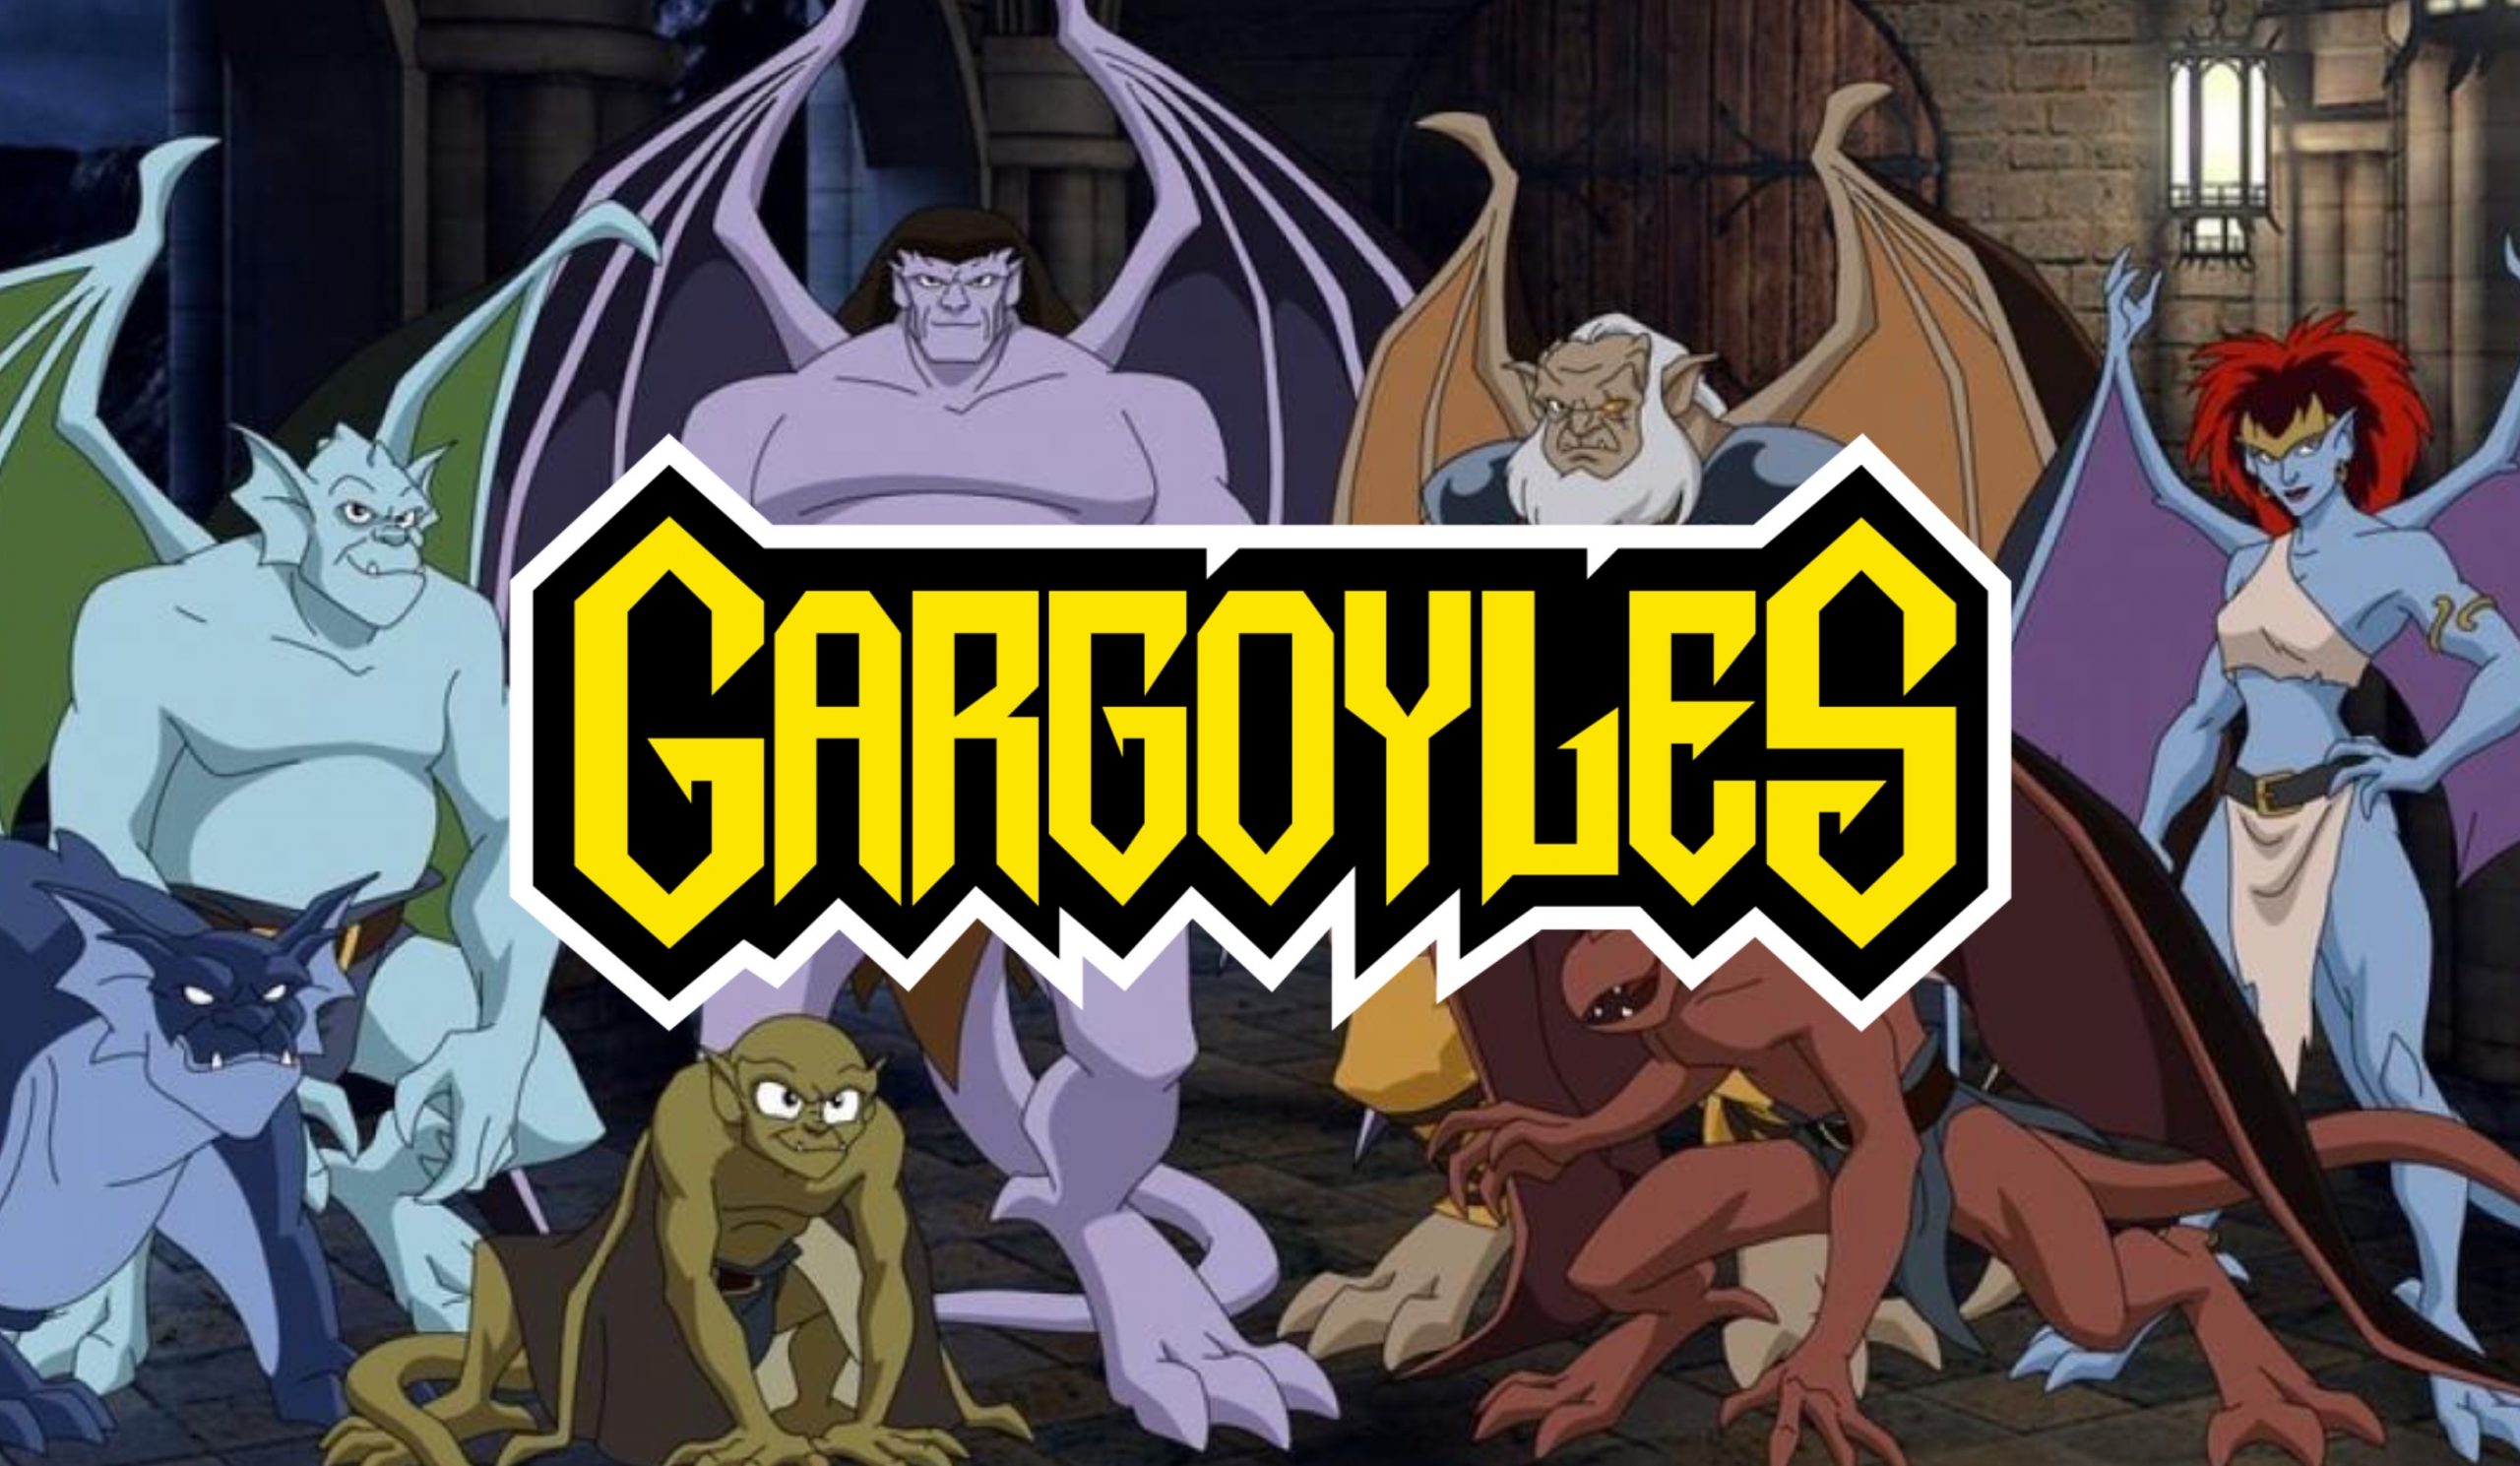 Live-Action Gargoyles for Disney+ in the Works